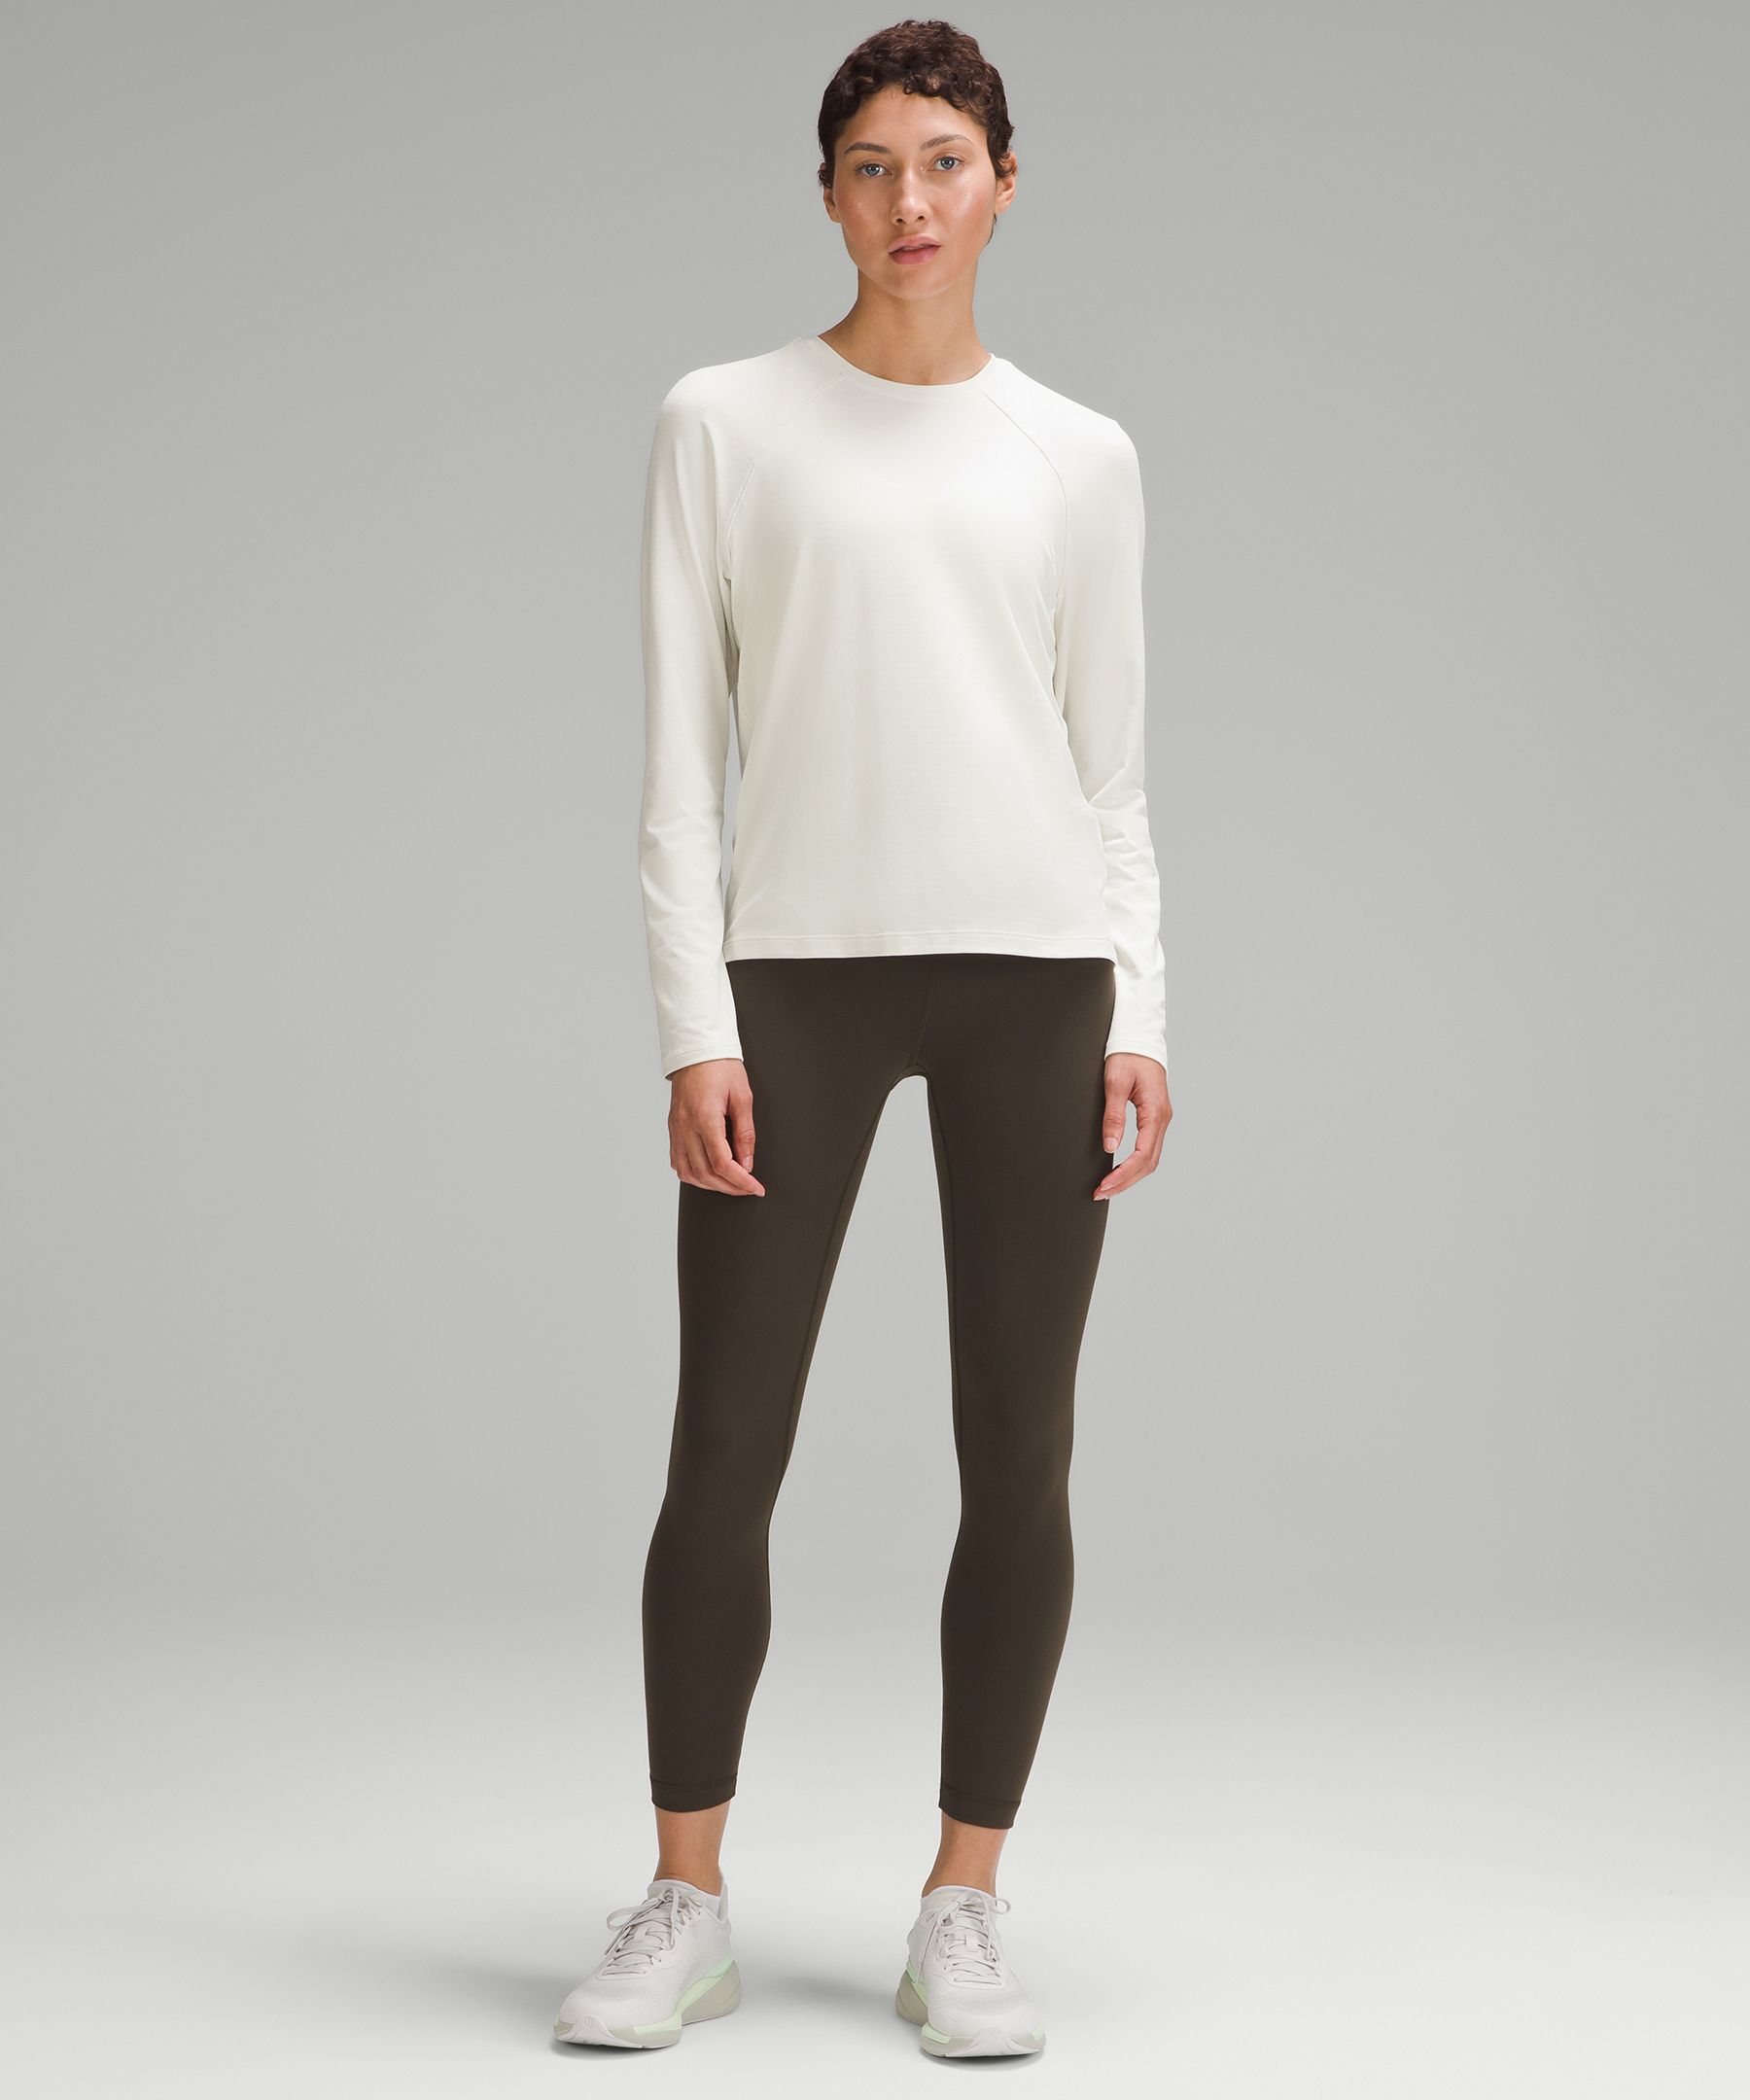 Lululemon athletica License to Train Relaxed-Fit Long-Sleeve Shirt